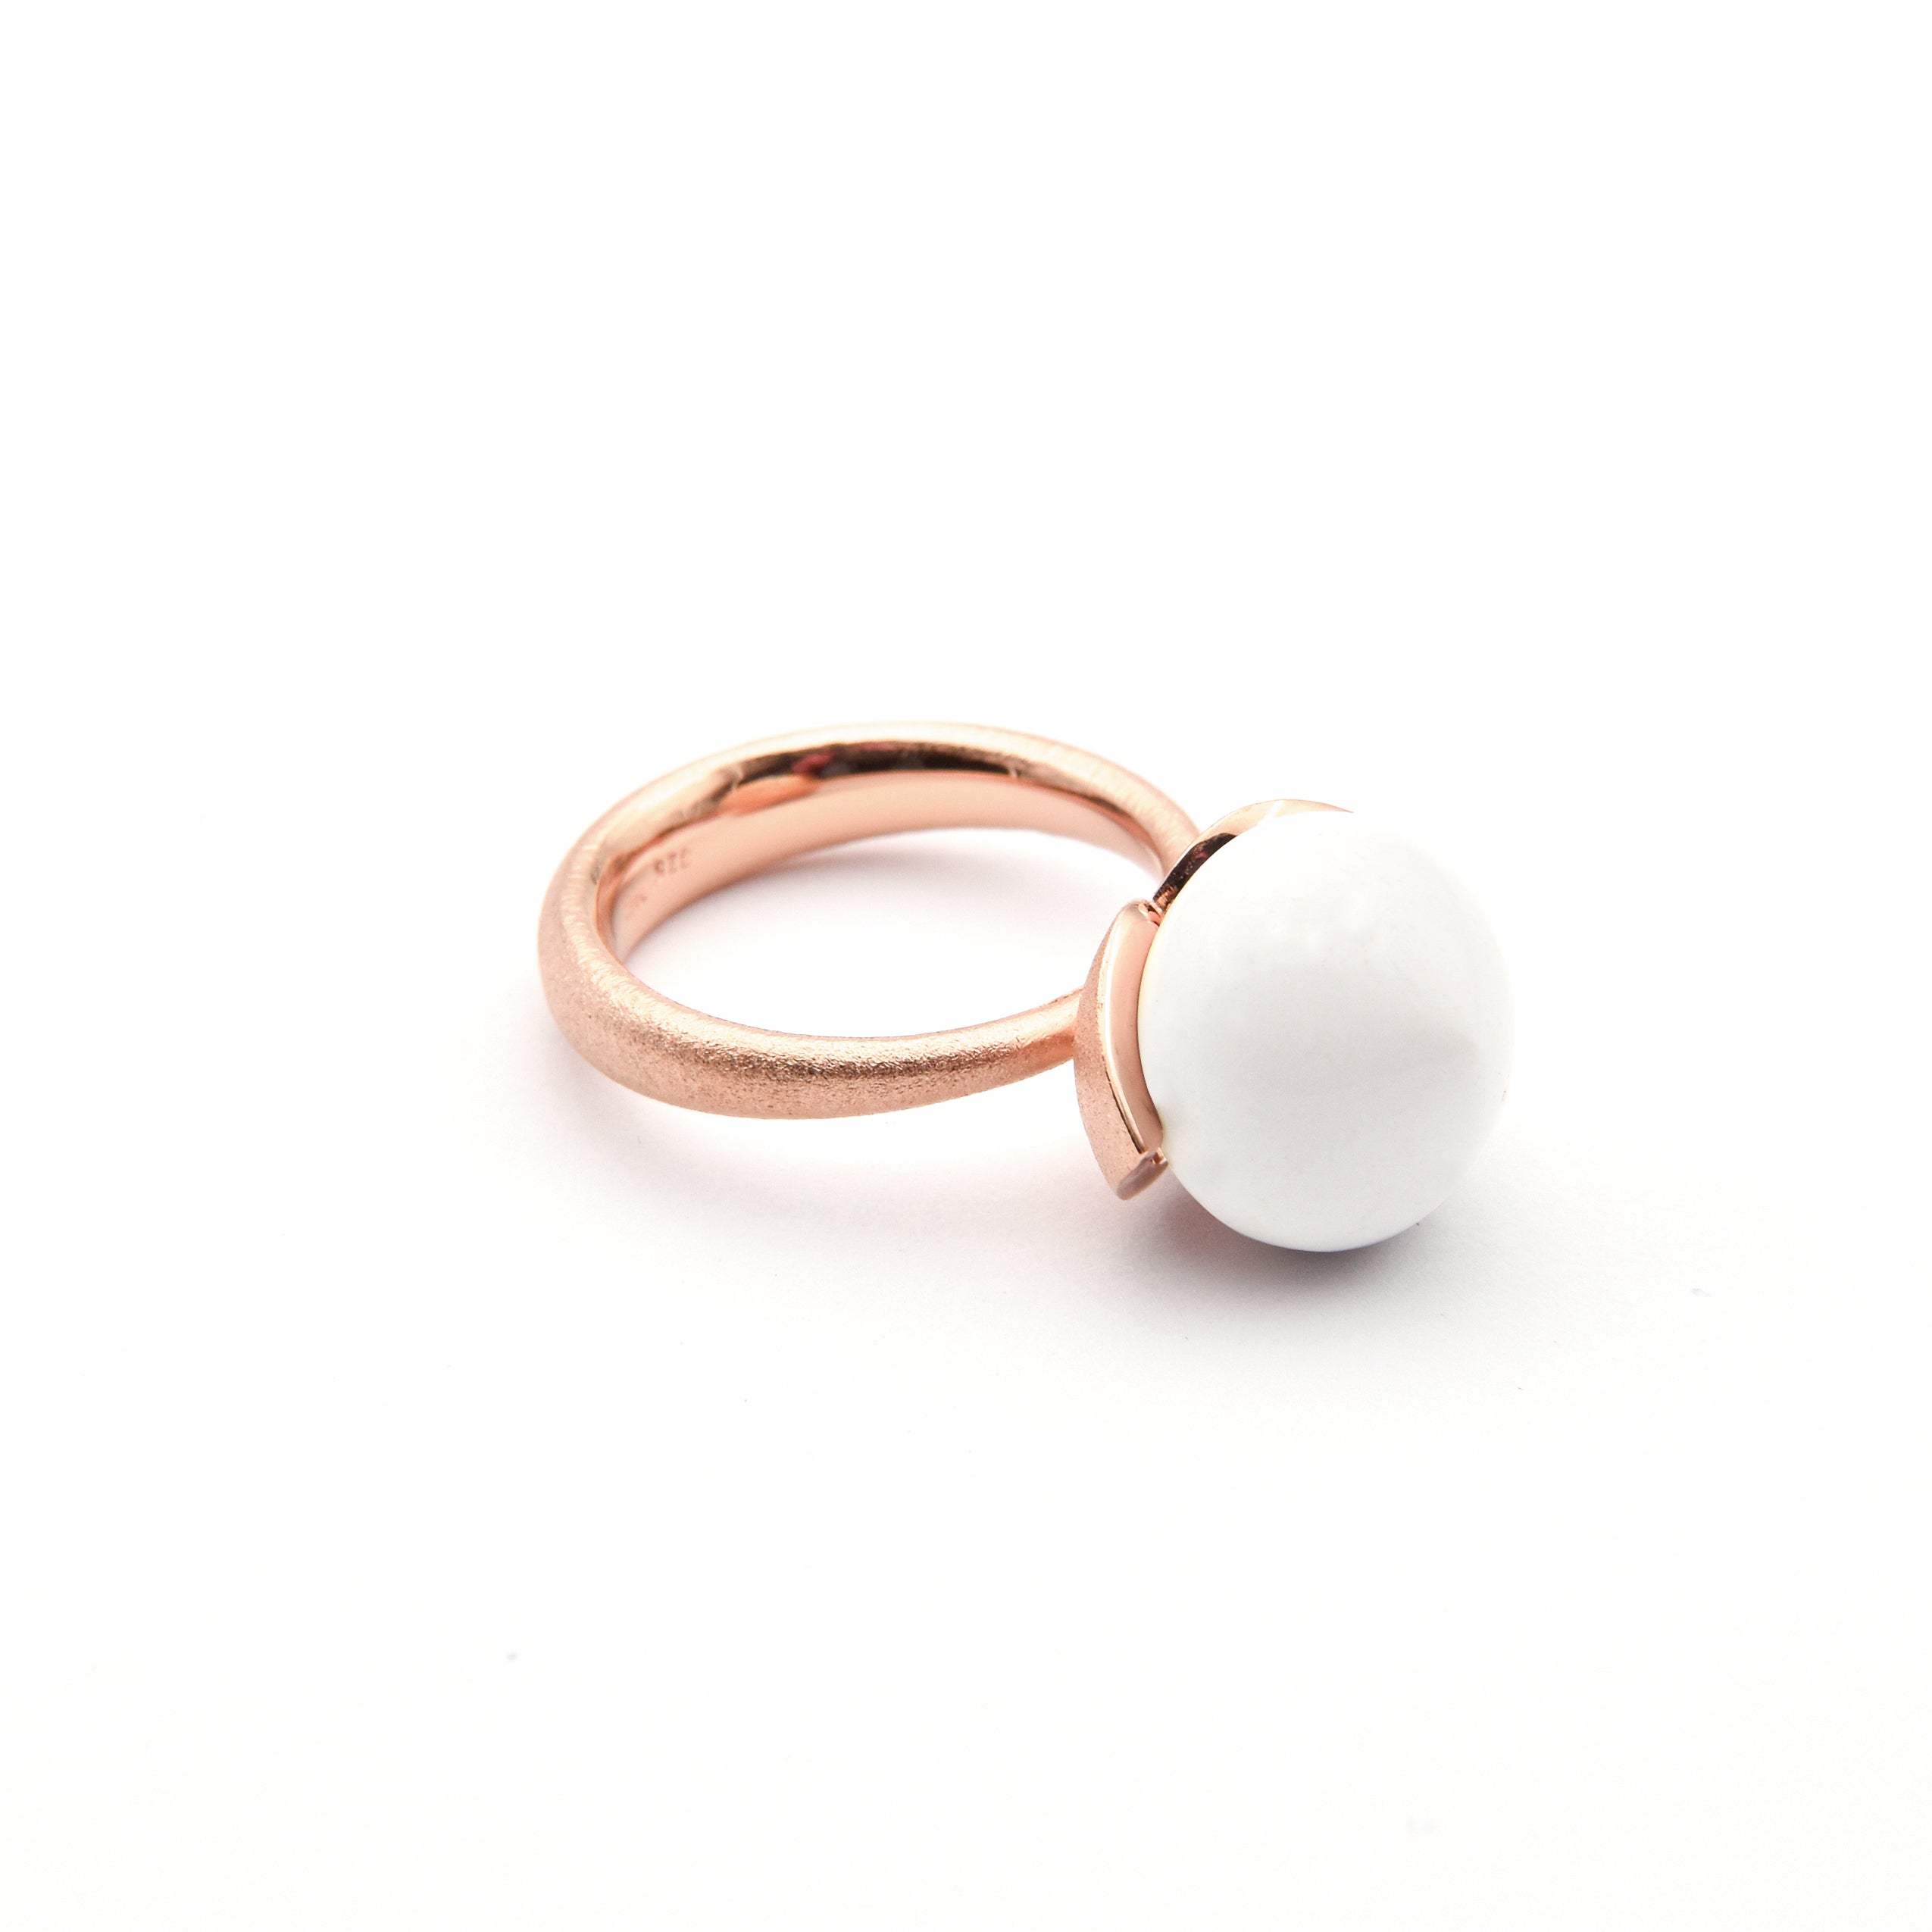 Dolce Ring "big" mit Kascholong 925/-